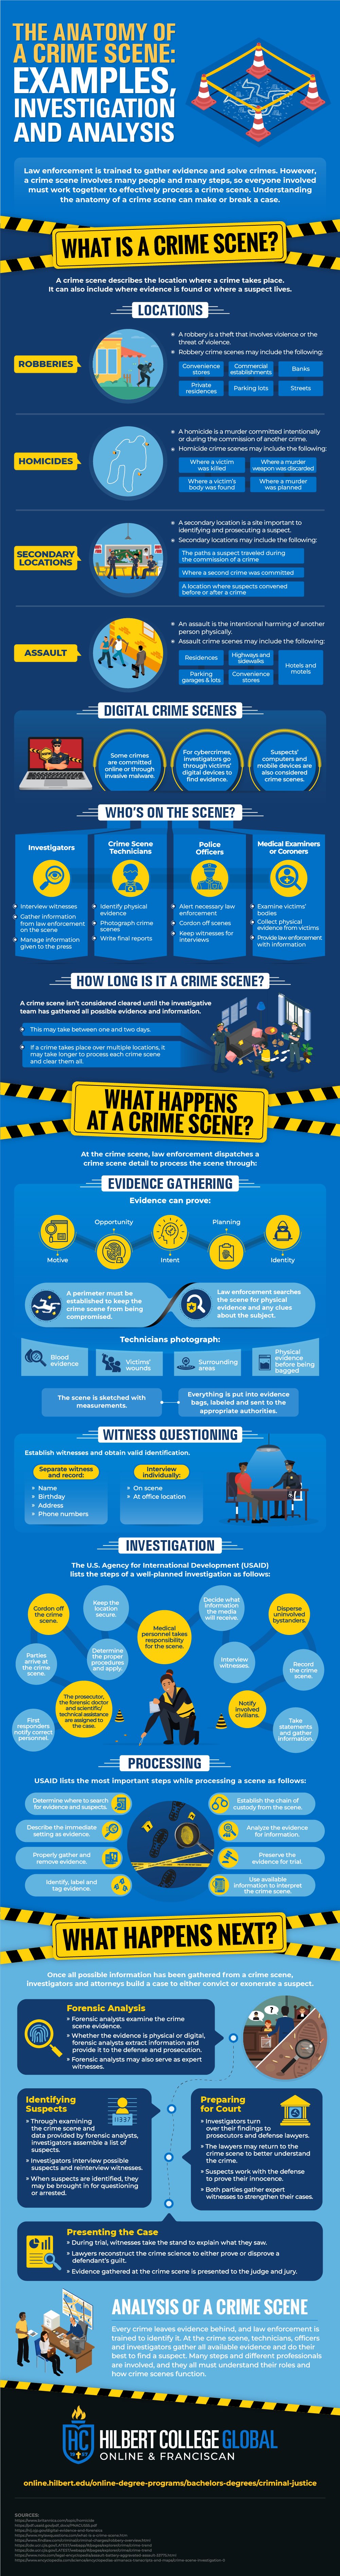 The Anatomy of a Crime Scene: Examples, Investigation and Analysis